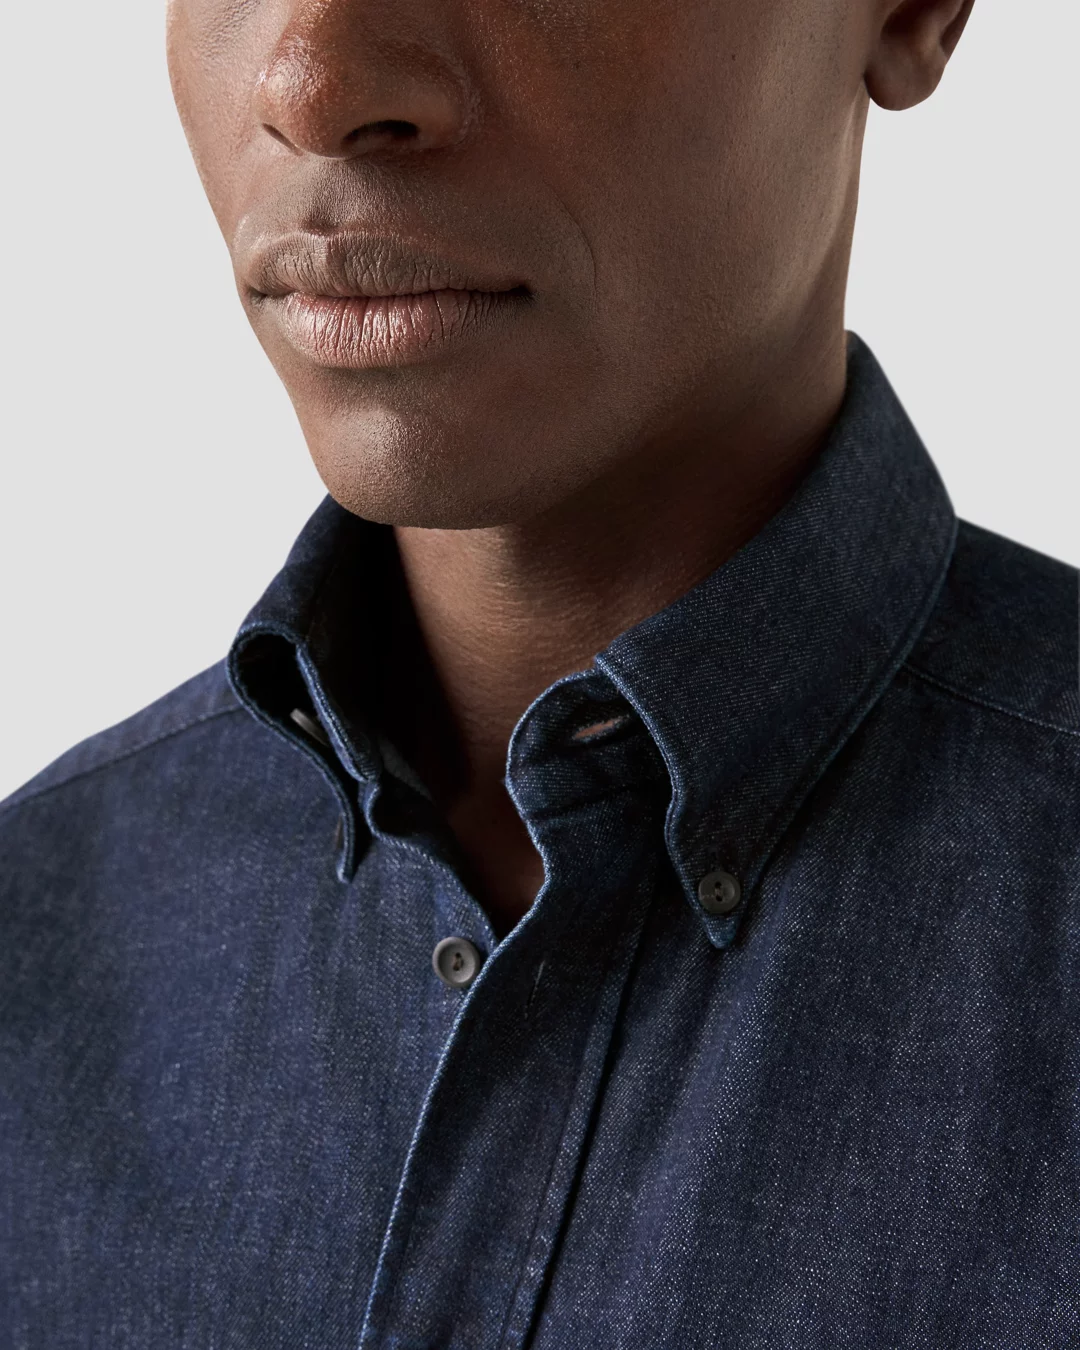 30 Best Men's Denim Shirts in 2024, According to Style Experts